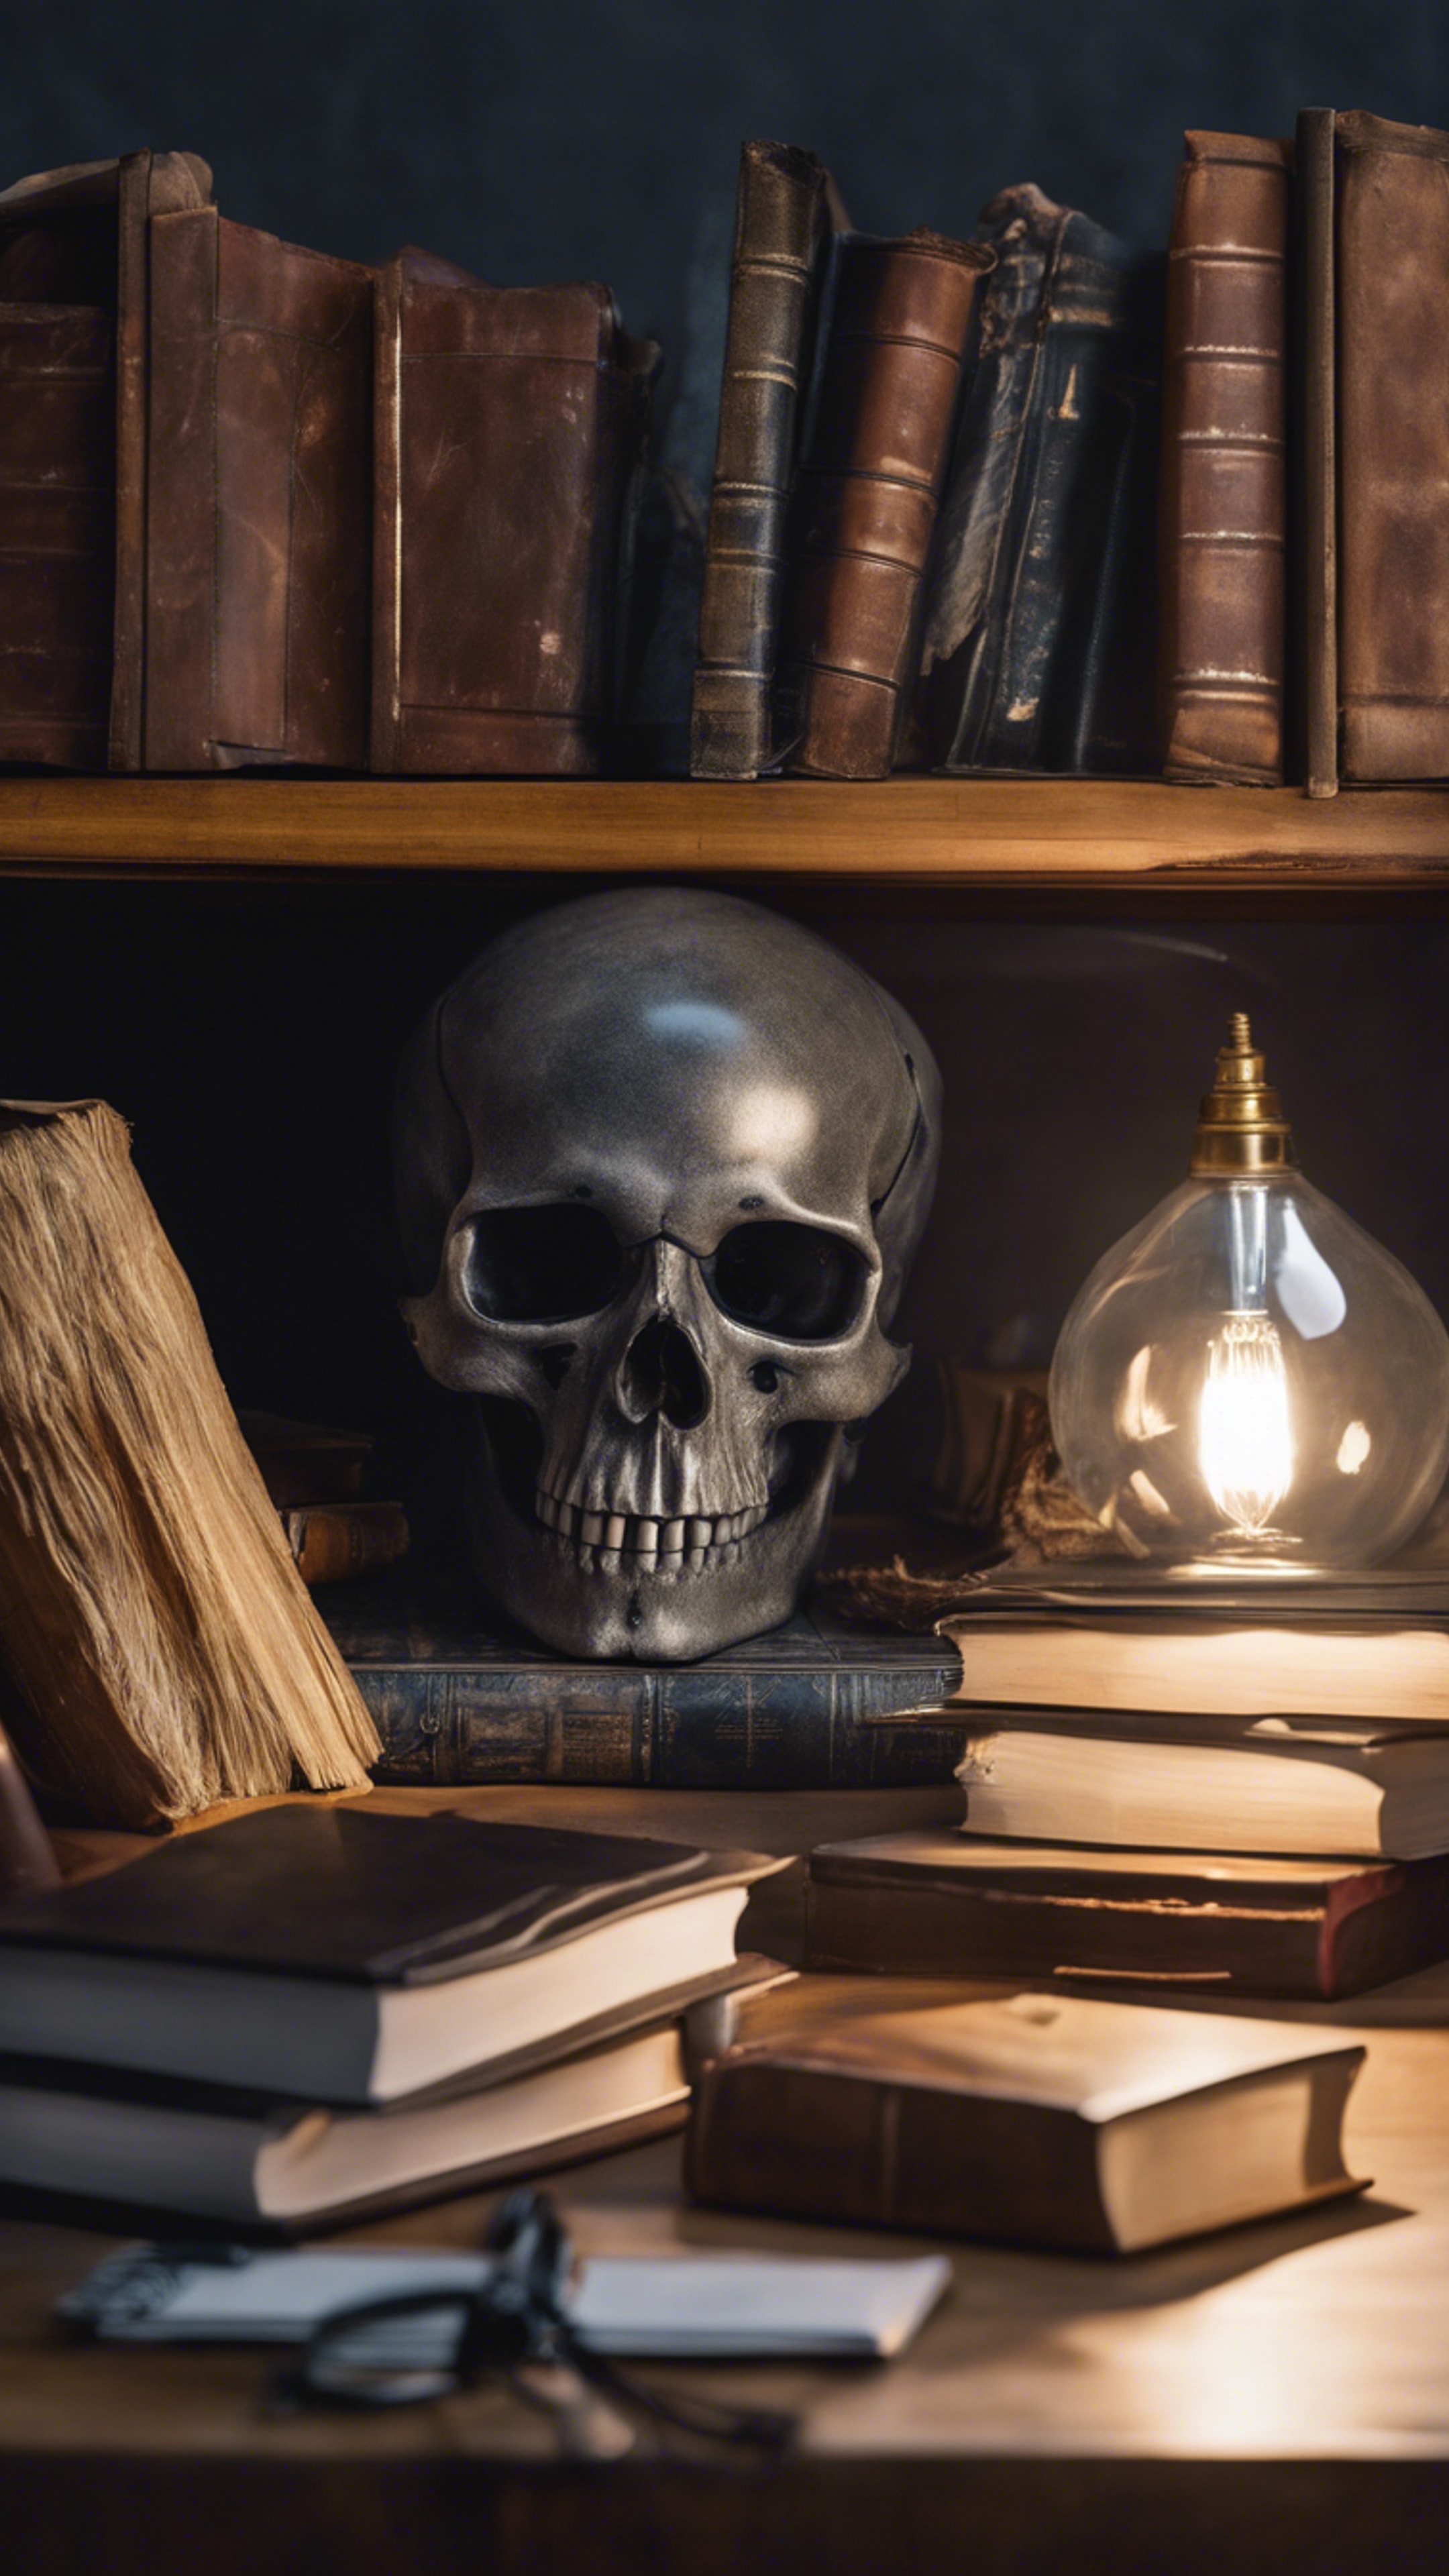 A study desk with a gray skull paperweight, surrounded by scattered books and a dimly lit lamp. کاغذ دیواری[9ada7a5adc764debb4f2]